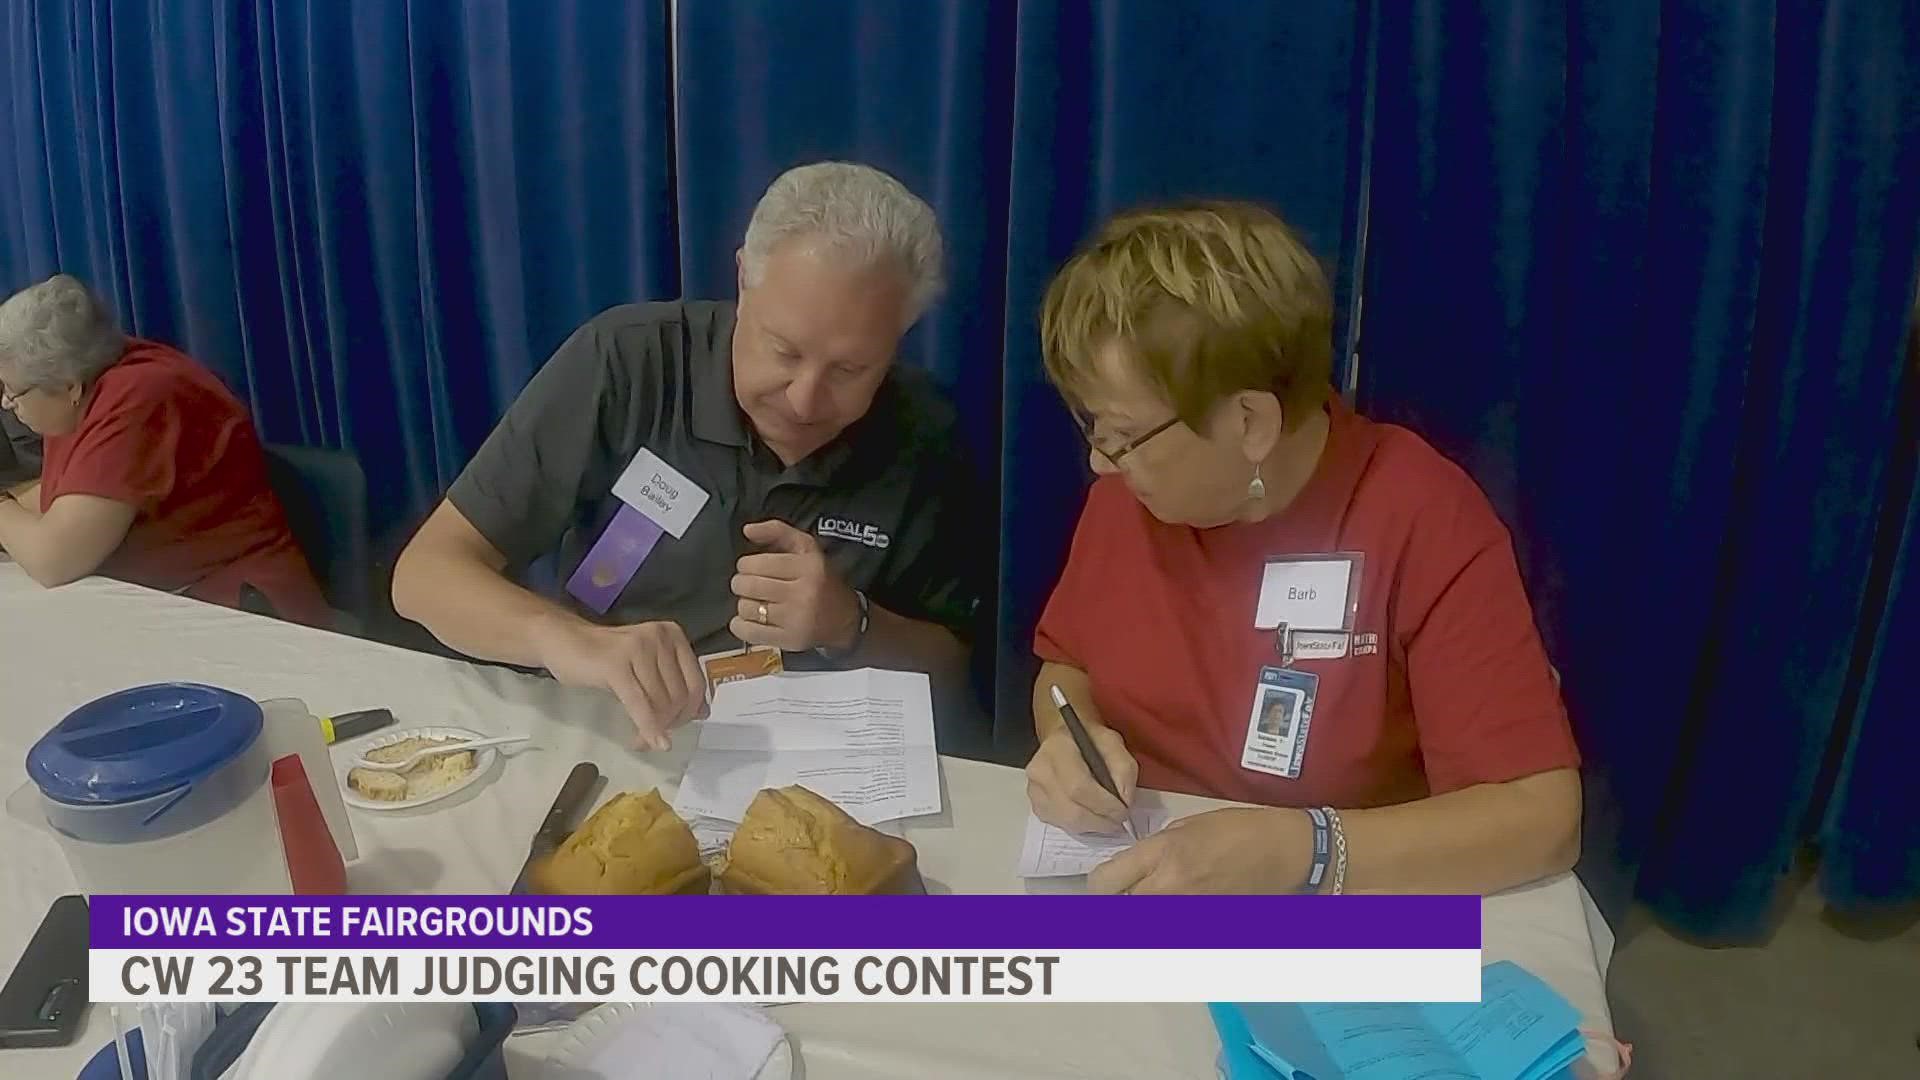 Local 5's Lou Sipolt and Doug Bailey judged the state fair's beginners' cooking contest.